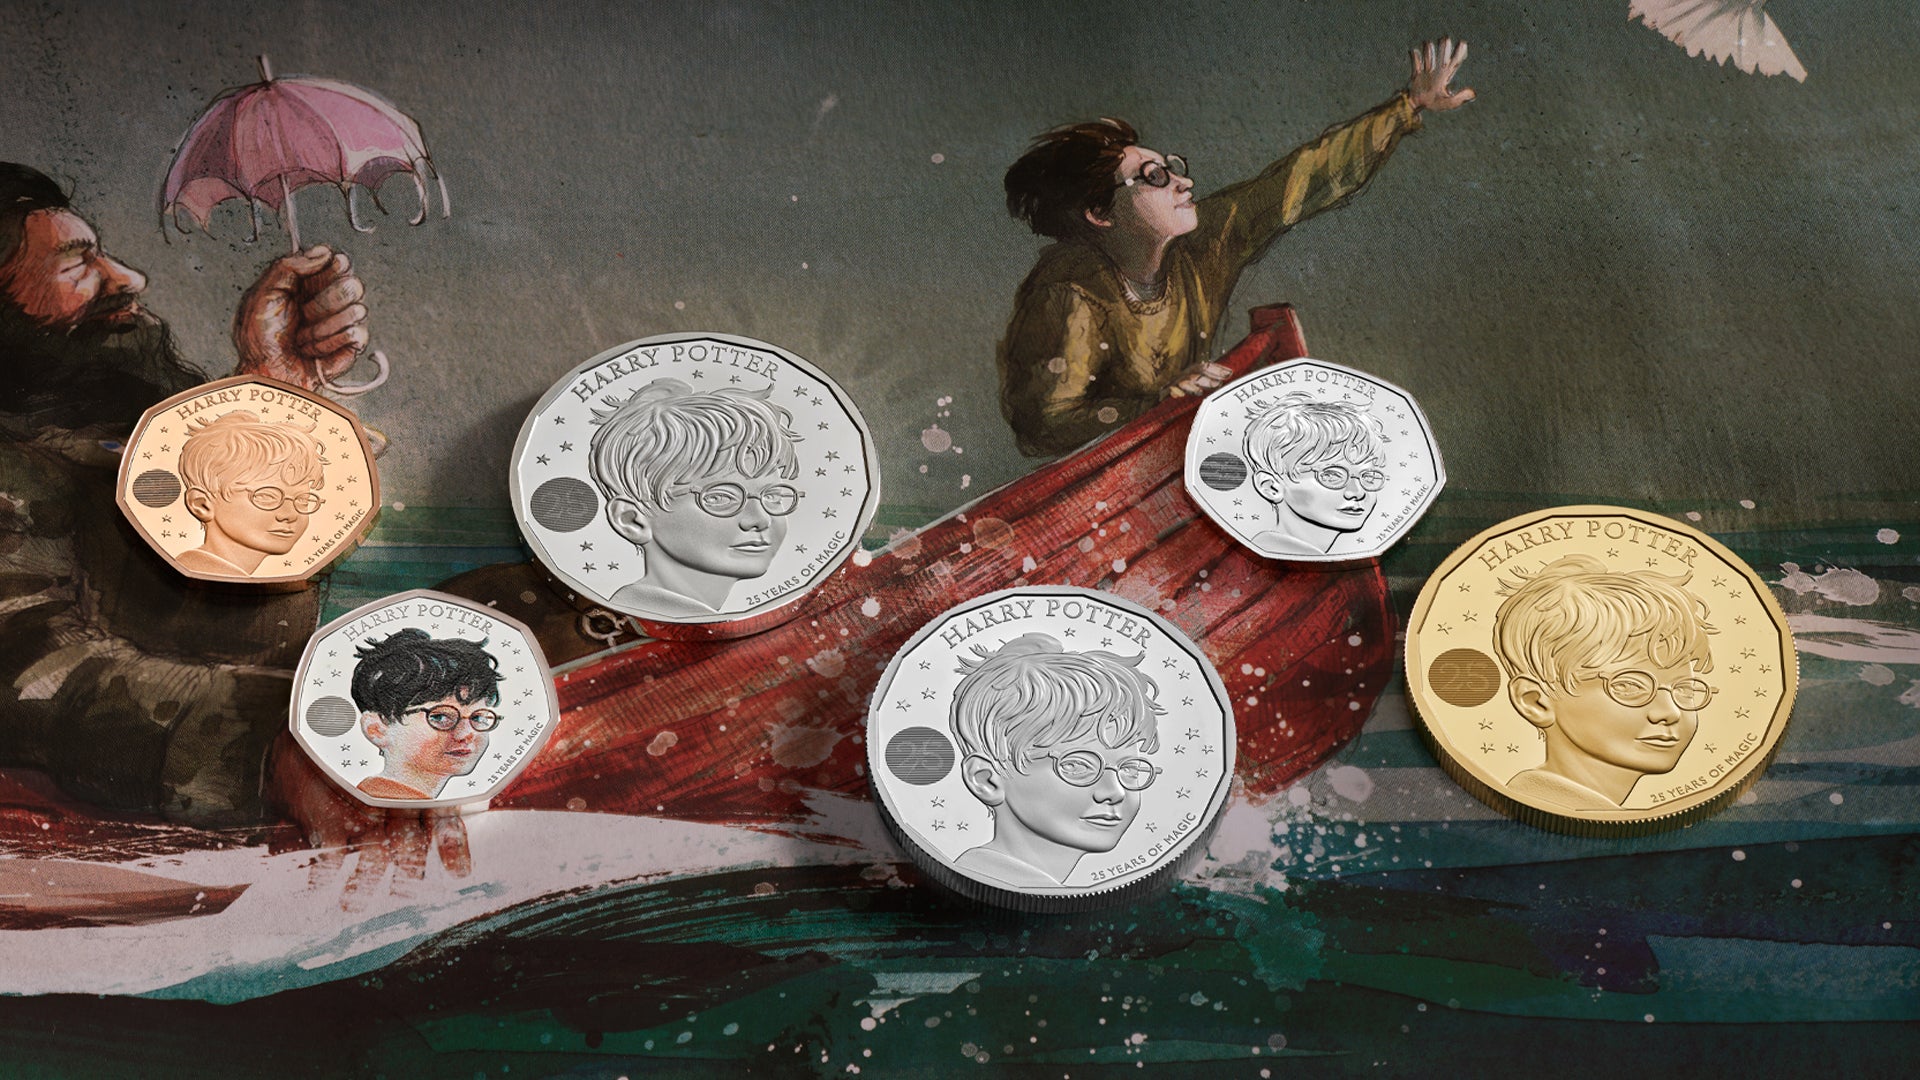 New Harry Potter coins have been unveiled by the Royal Mint (Royal Mint/PA)